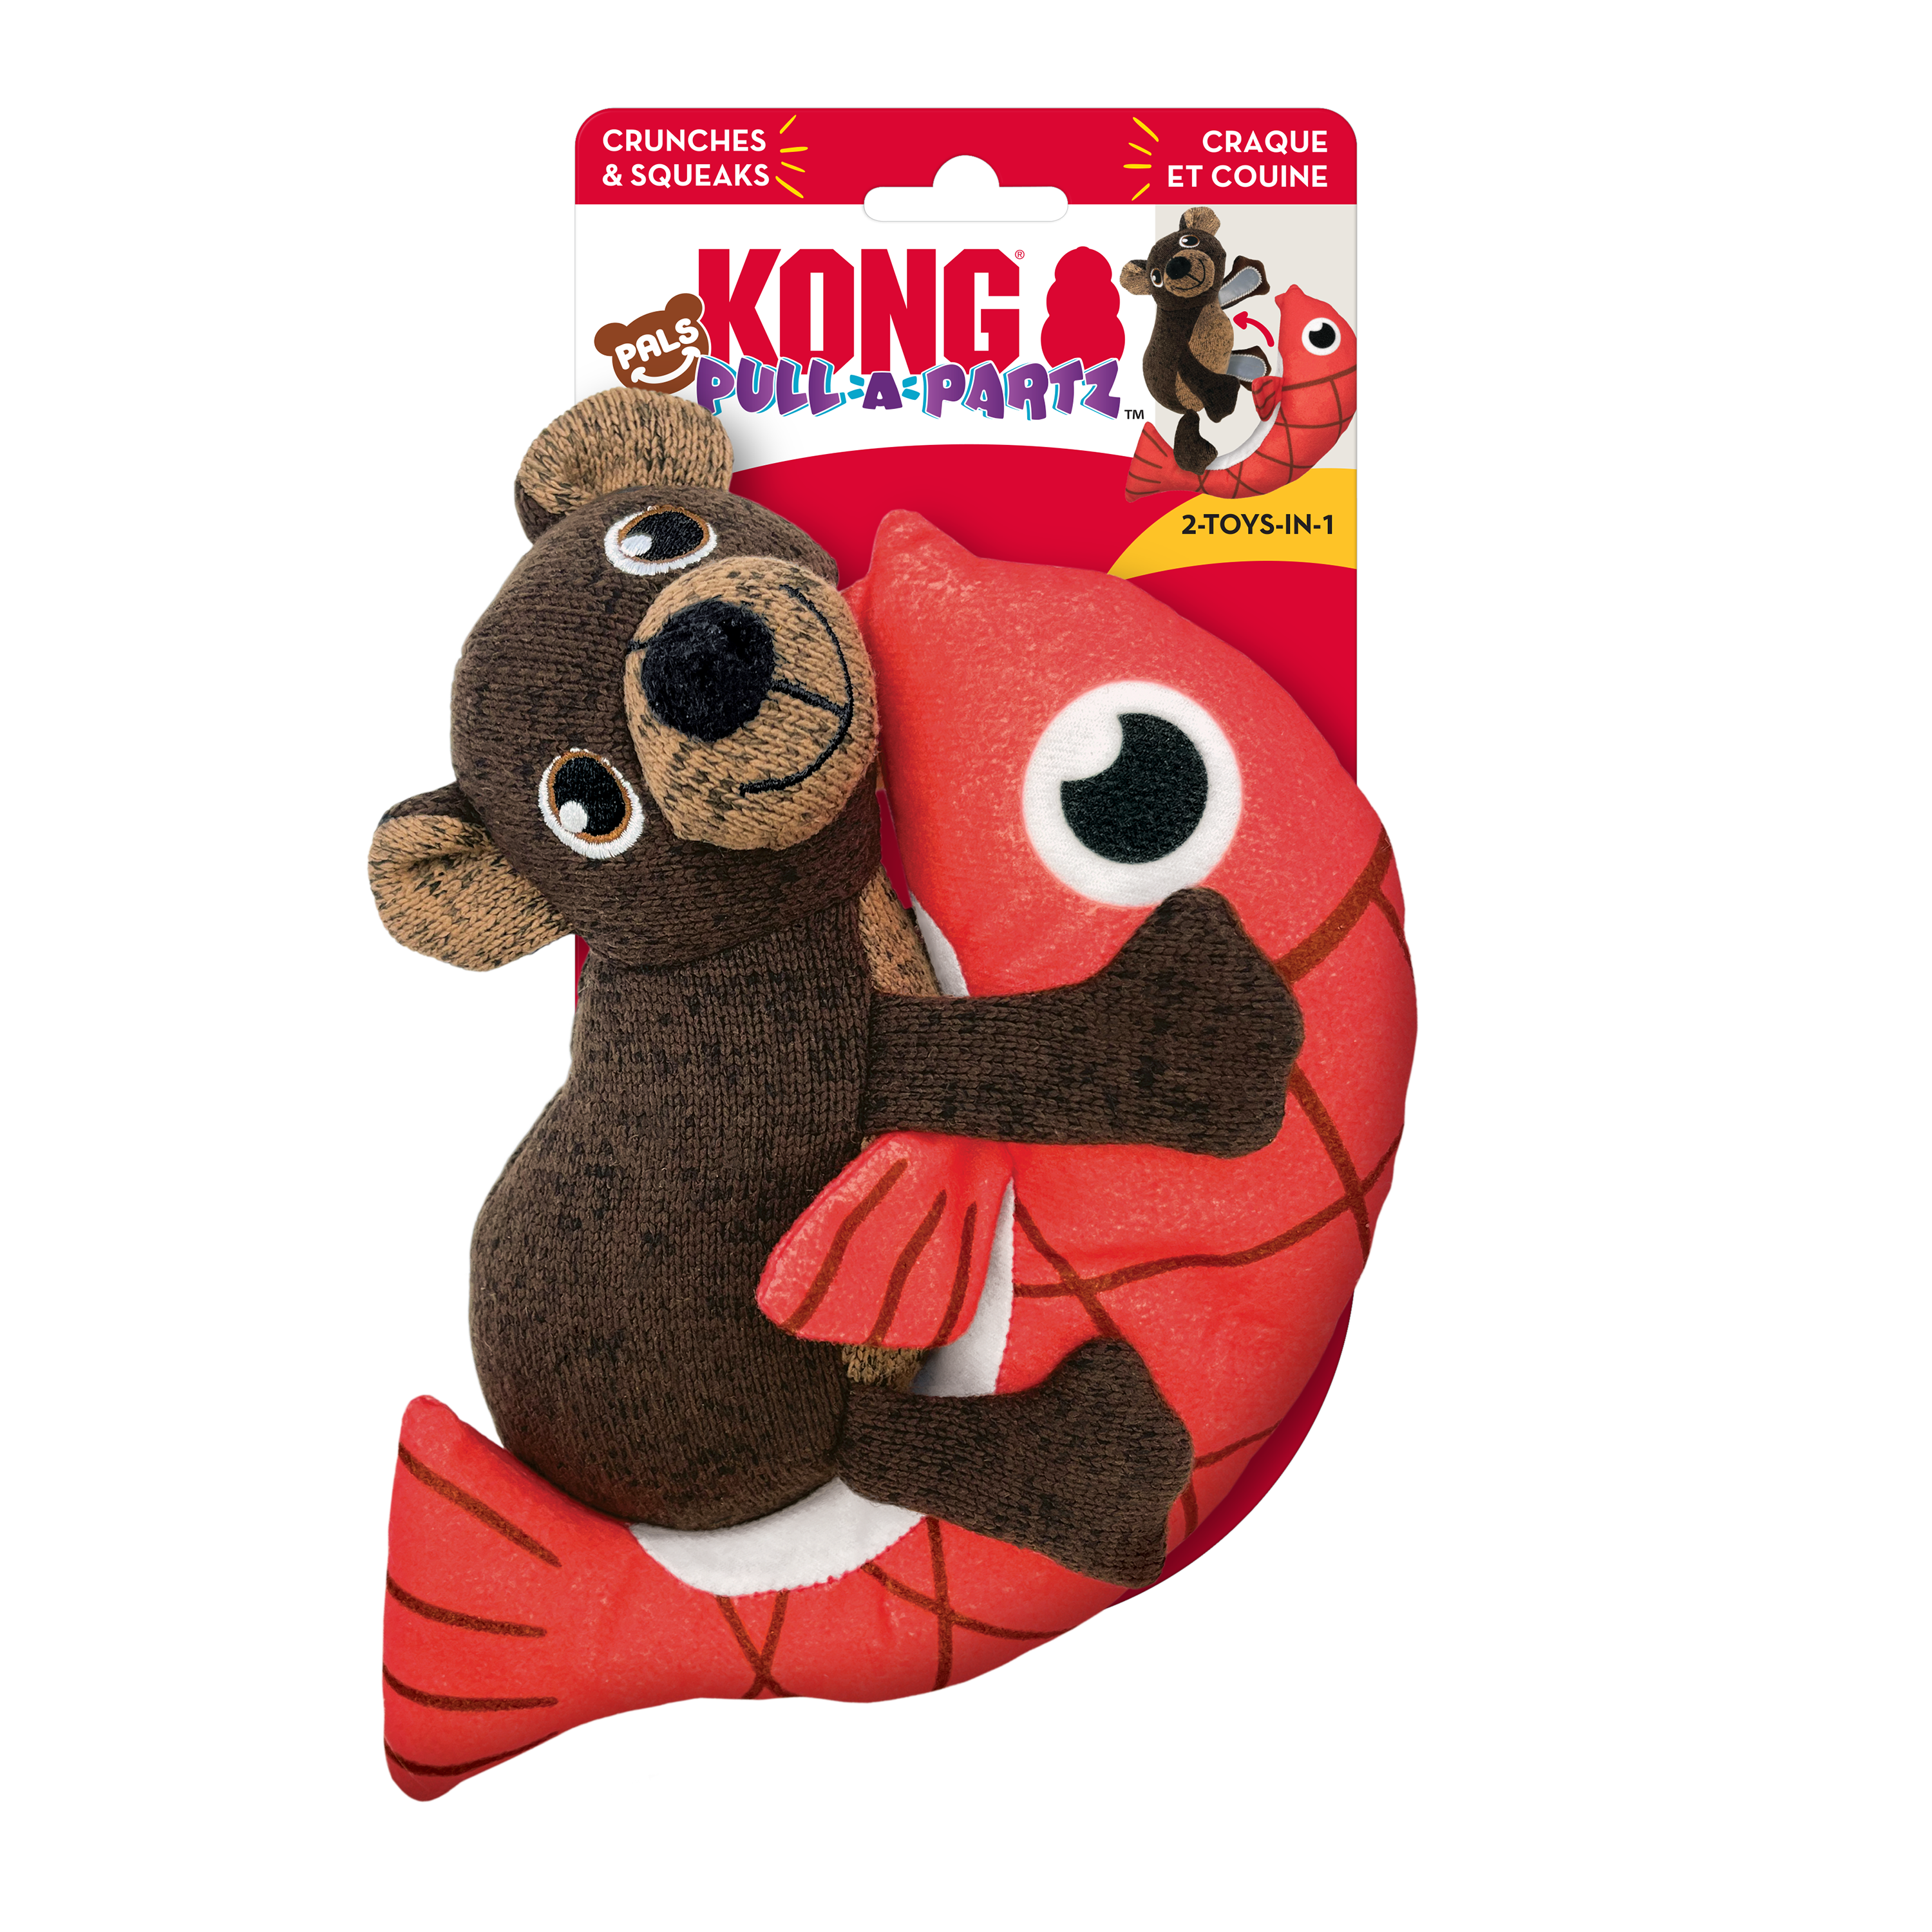 Pull-A-Partz Pals Bear onpack product image